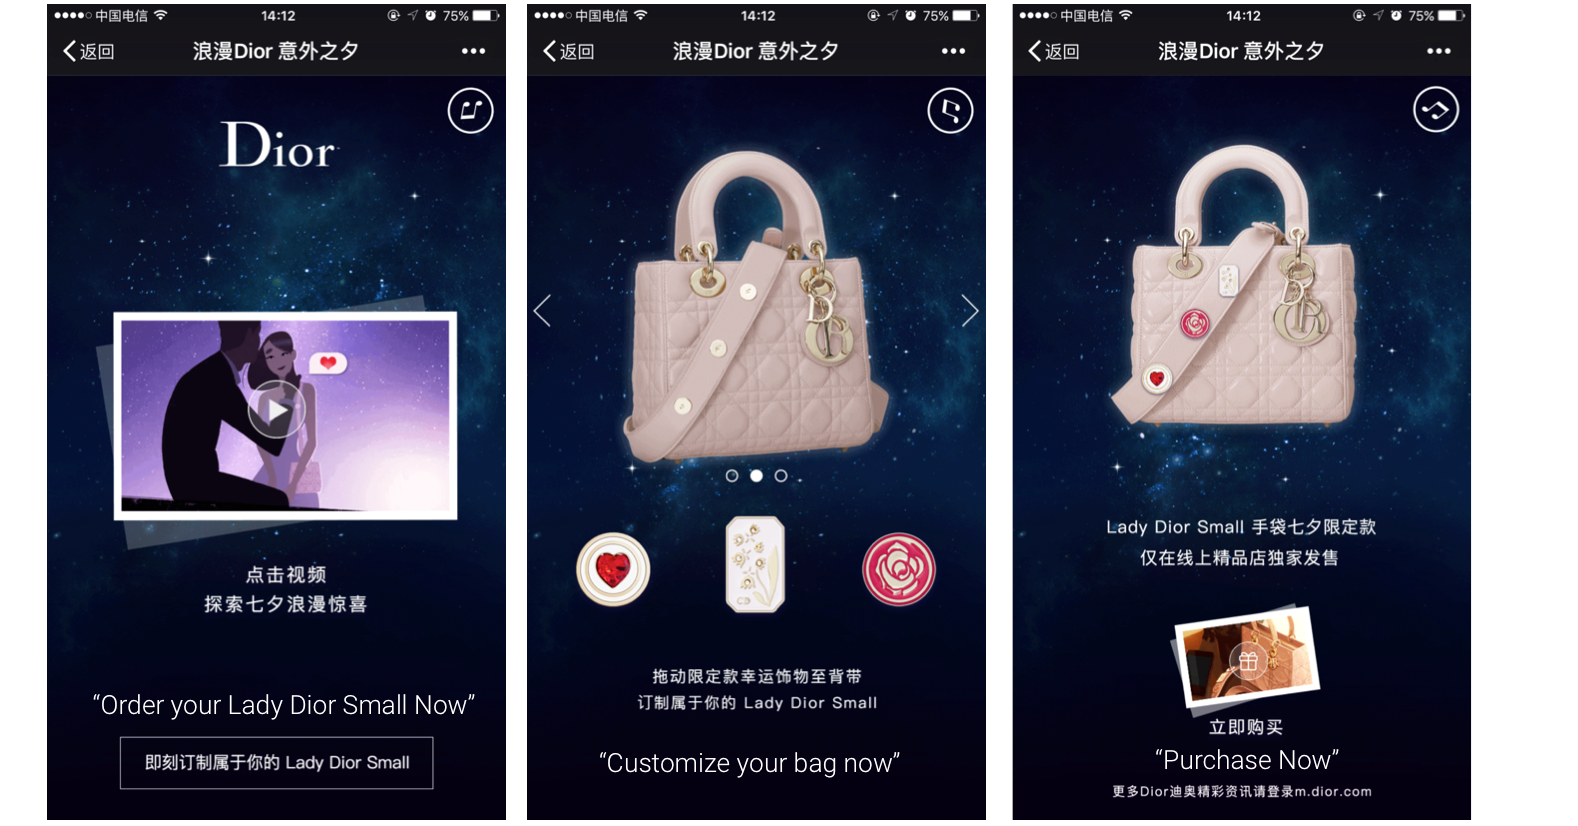 How Luxury Fashion Brands in China Use WeChat in 2017